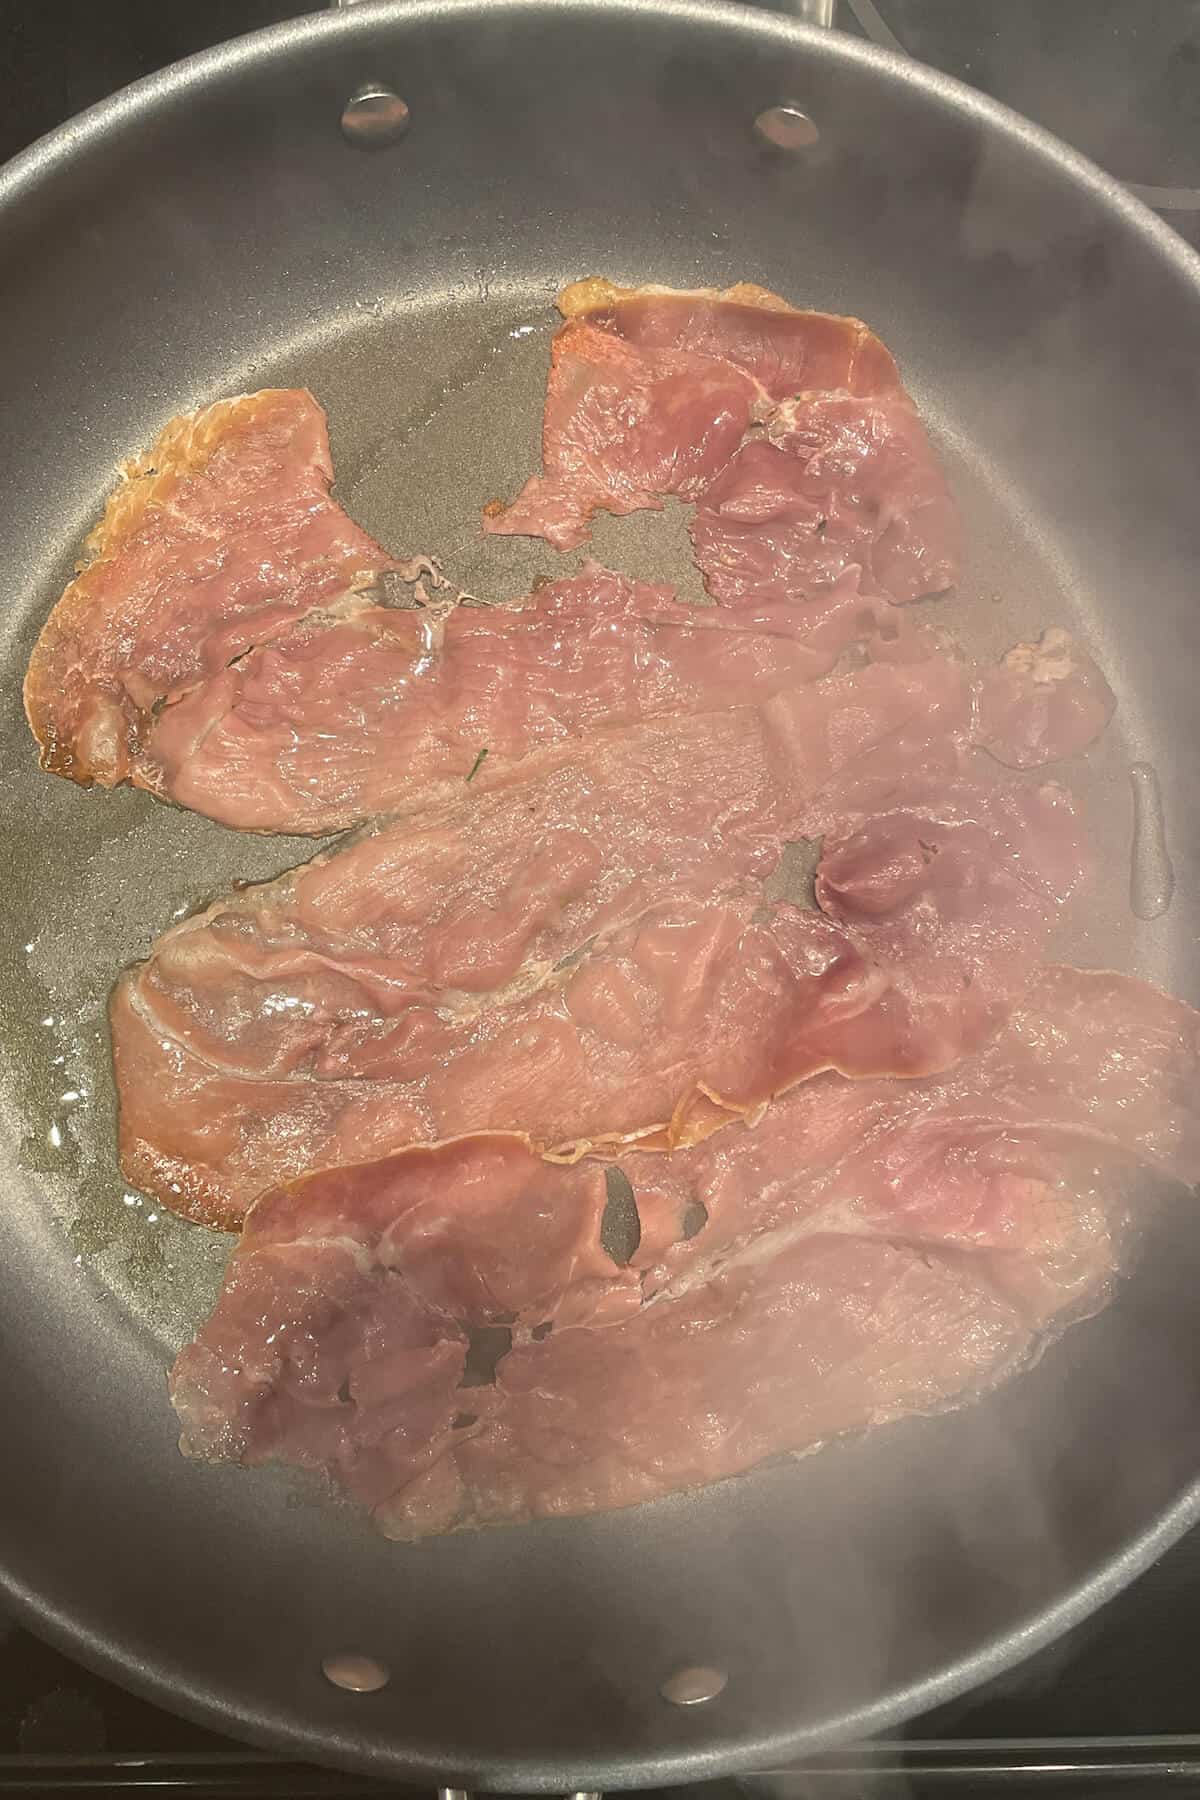 frying prosciutto is a pan